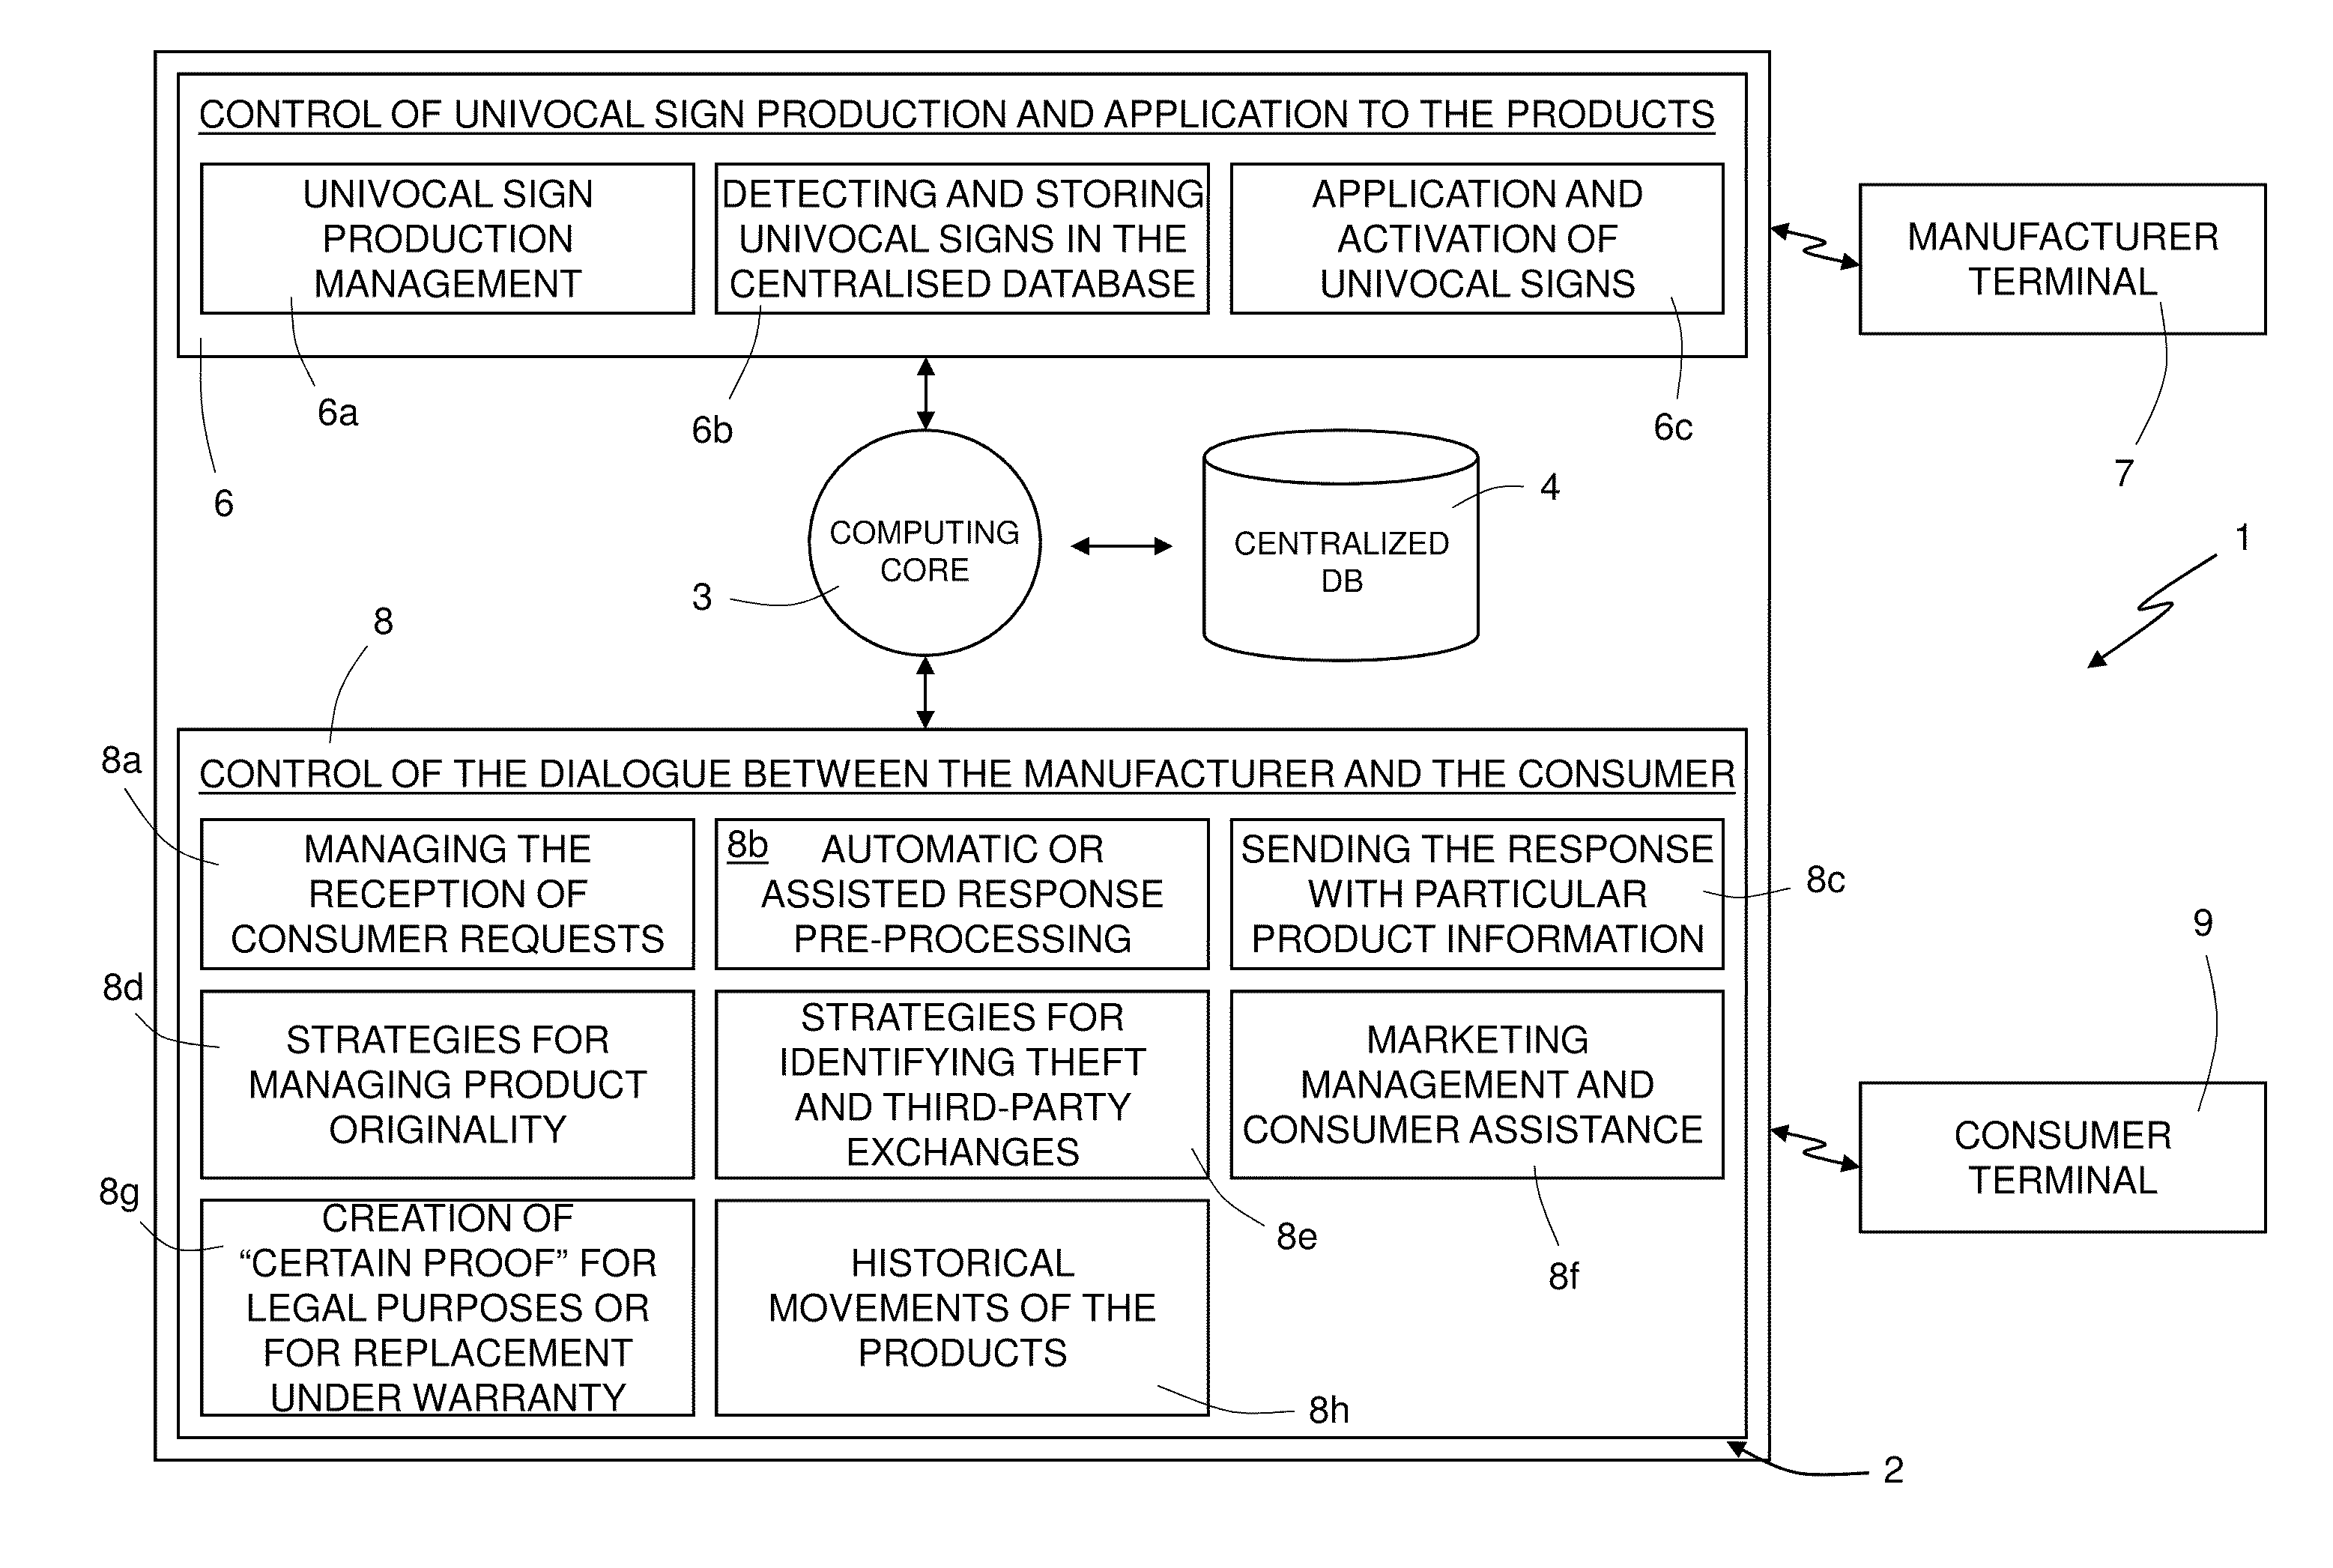 Centralized and computerized control system for checking the authenticity of a product